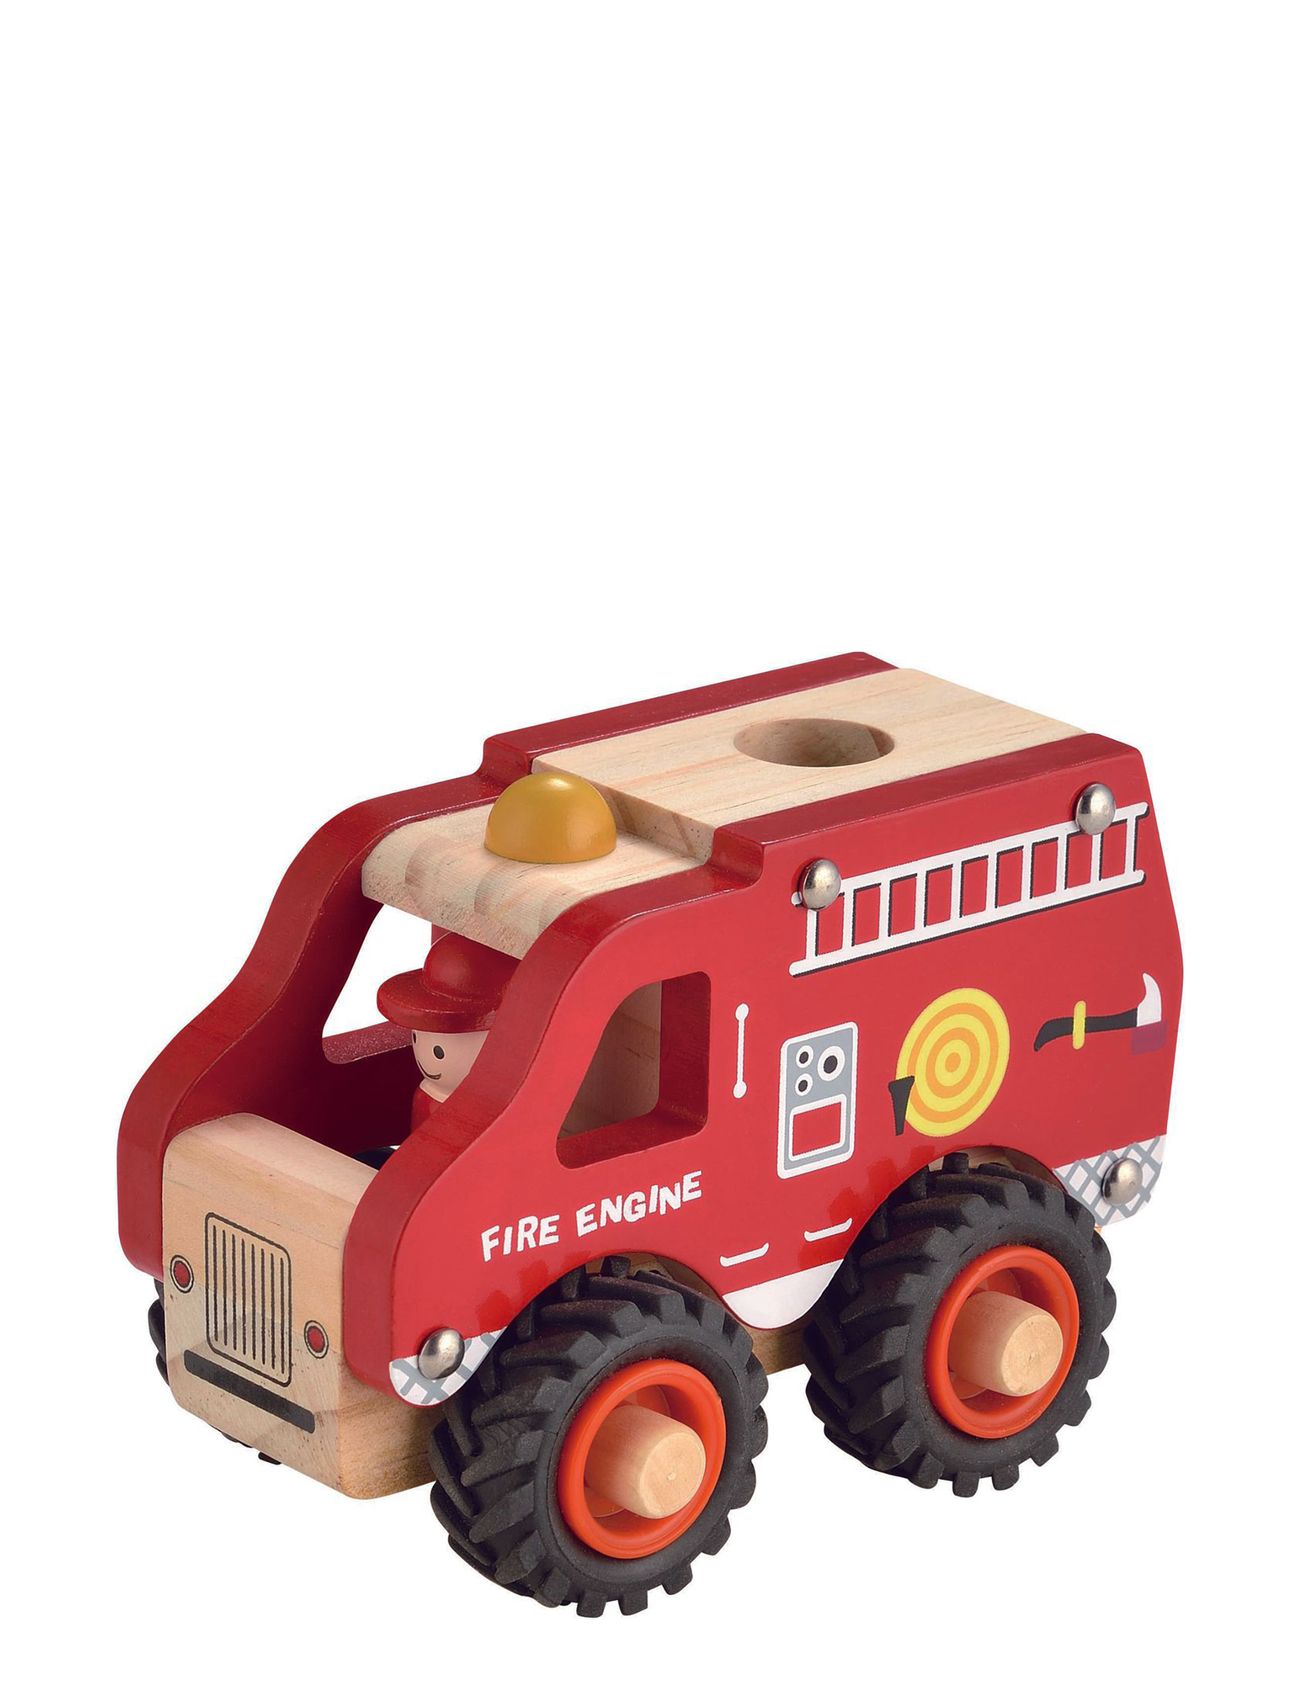 Wooden Fire Engine With Rubber Wheels Toys Toy Cars & Vehicles Toy Cars Fire Trucks Red Magni Toys